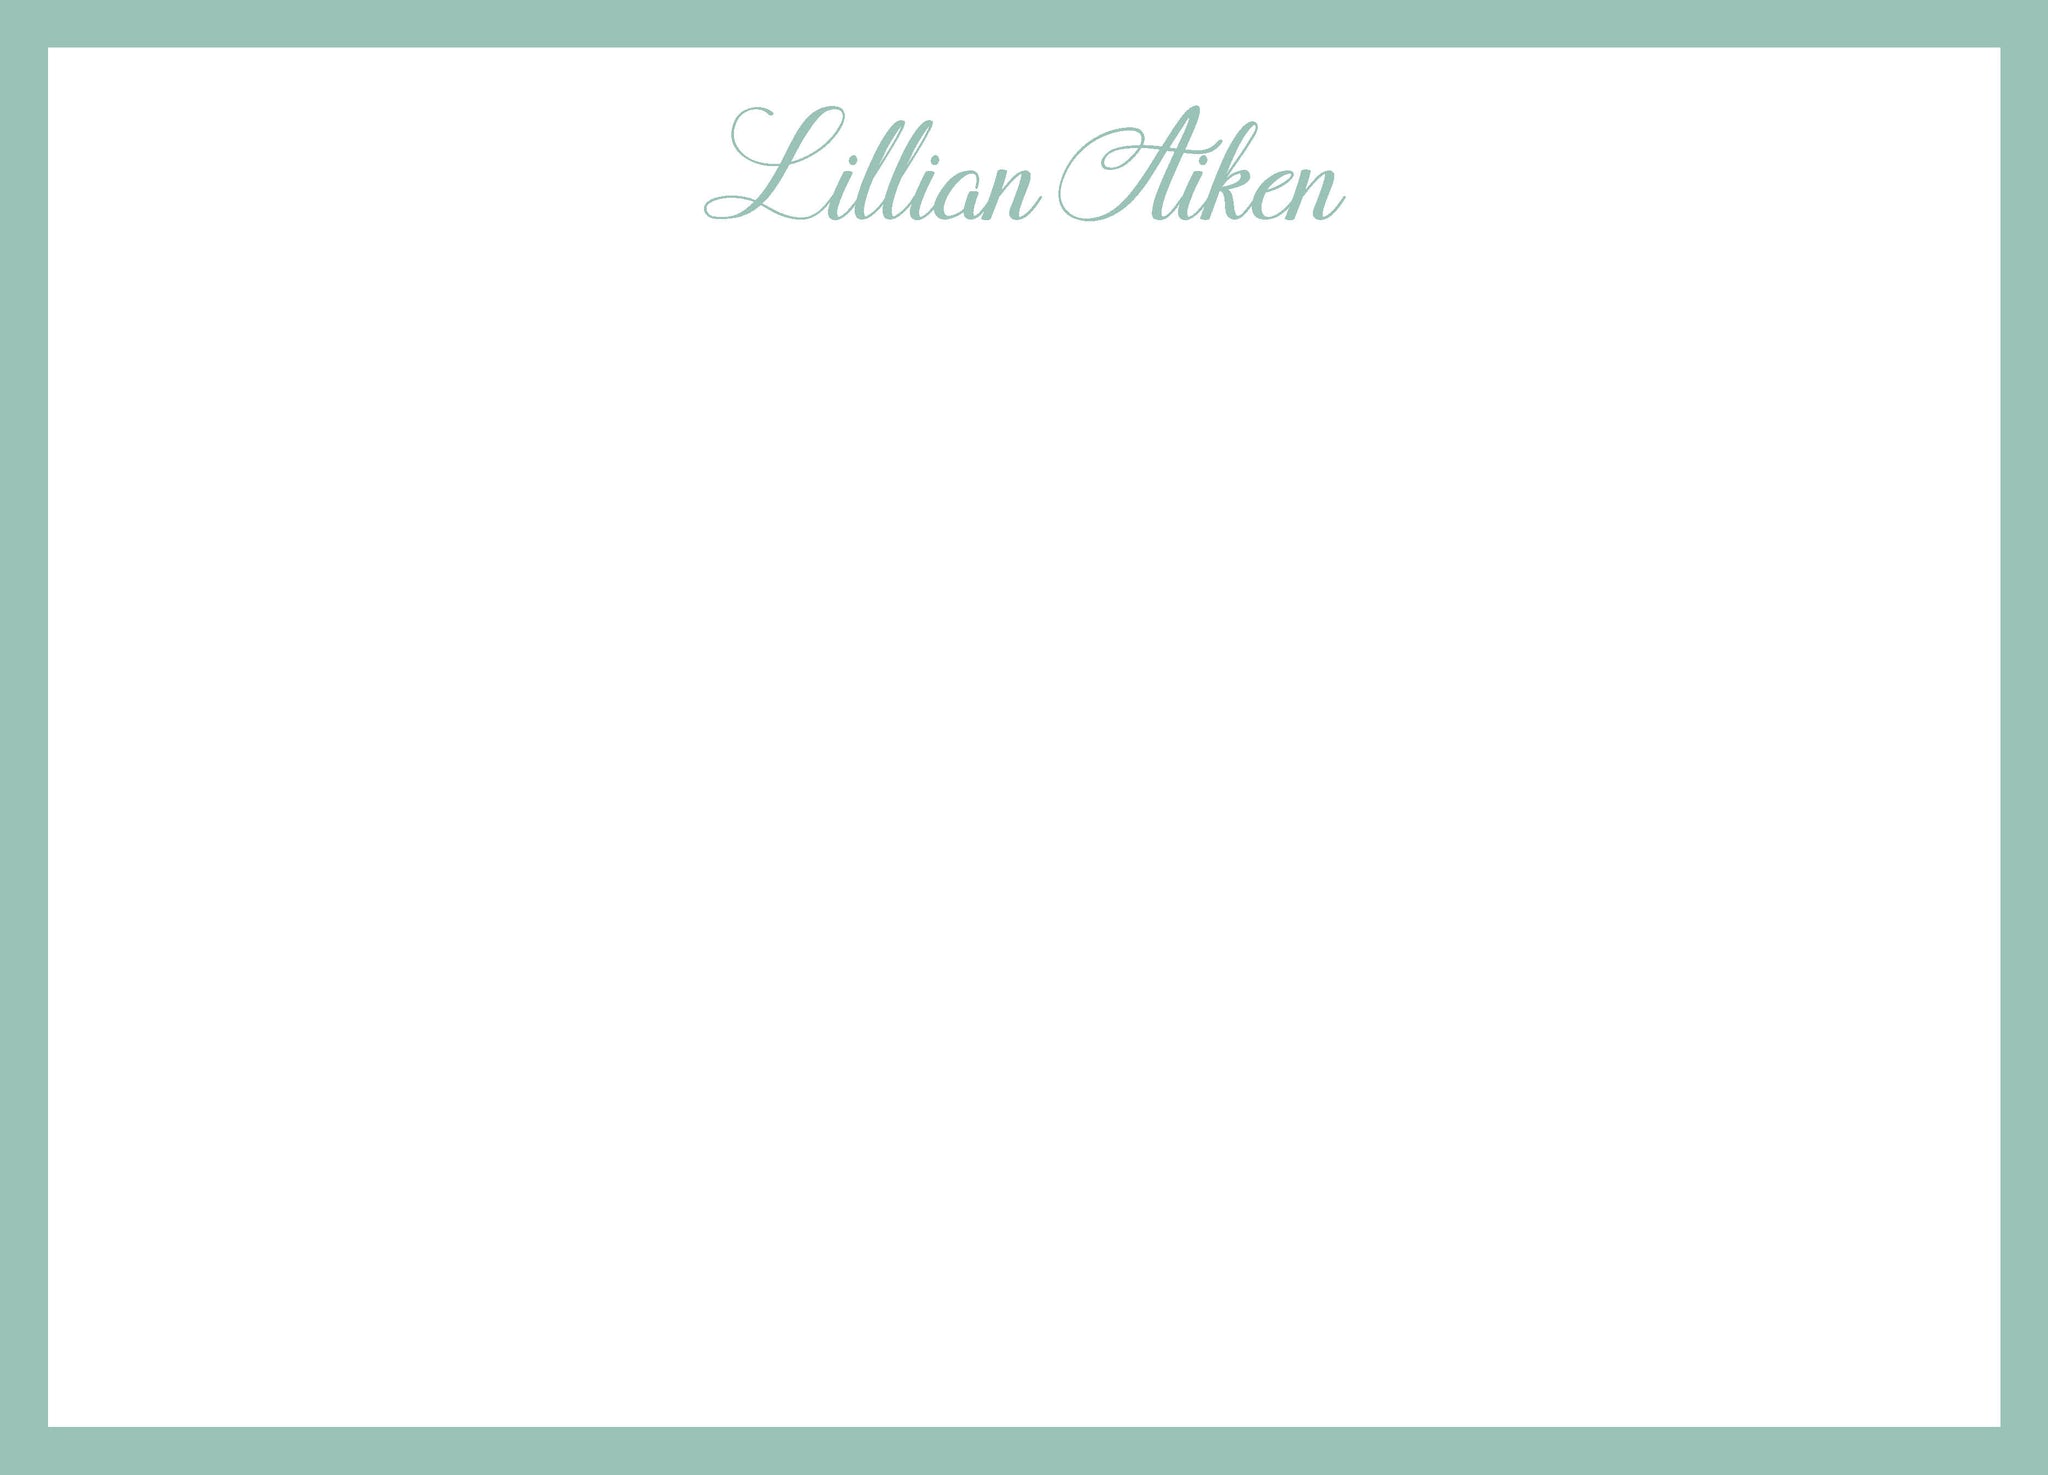 Lillian Personalized Note Cards